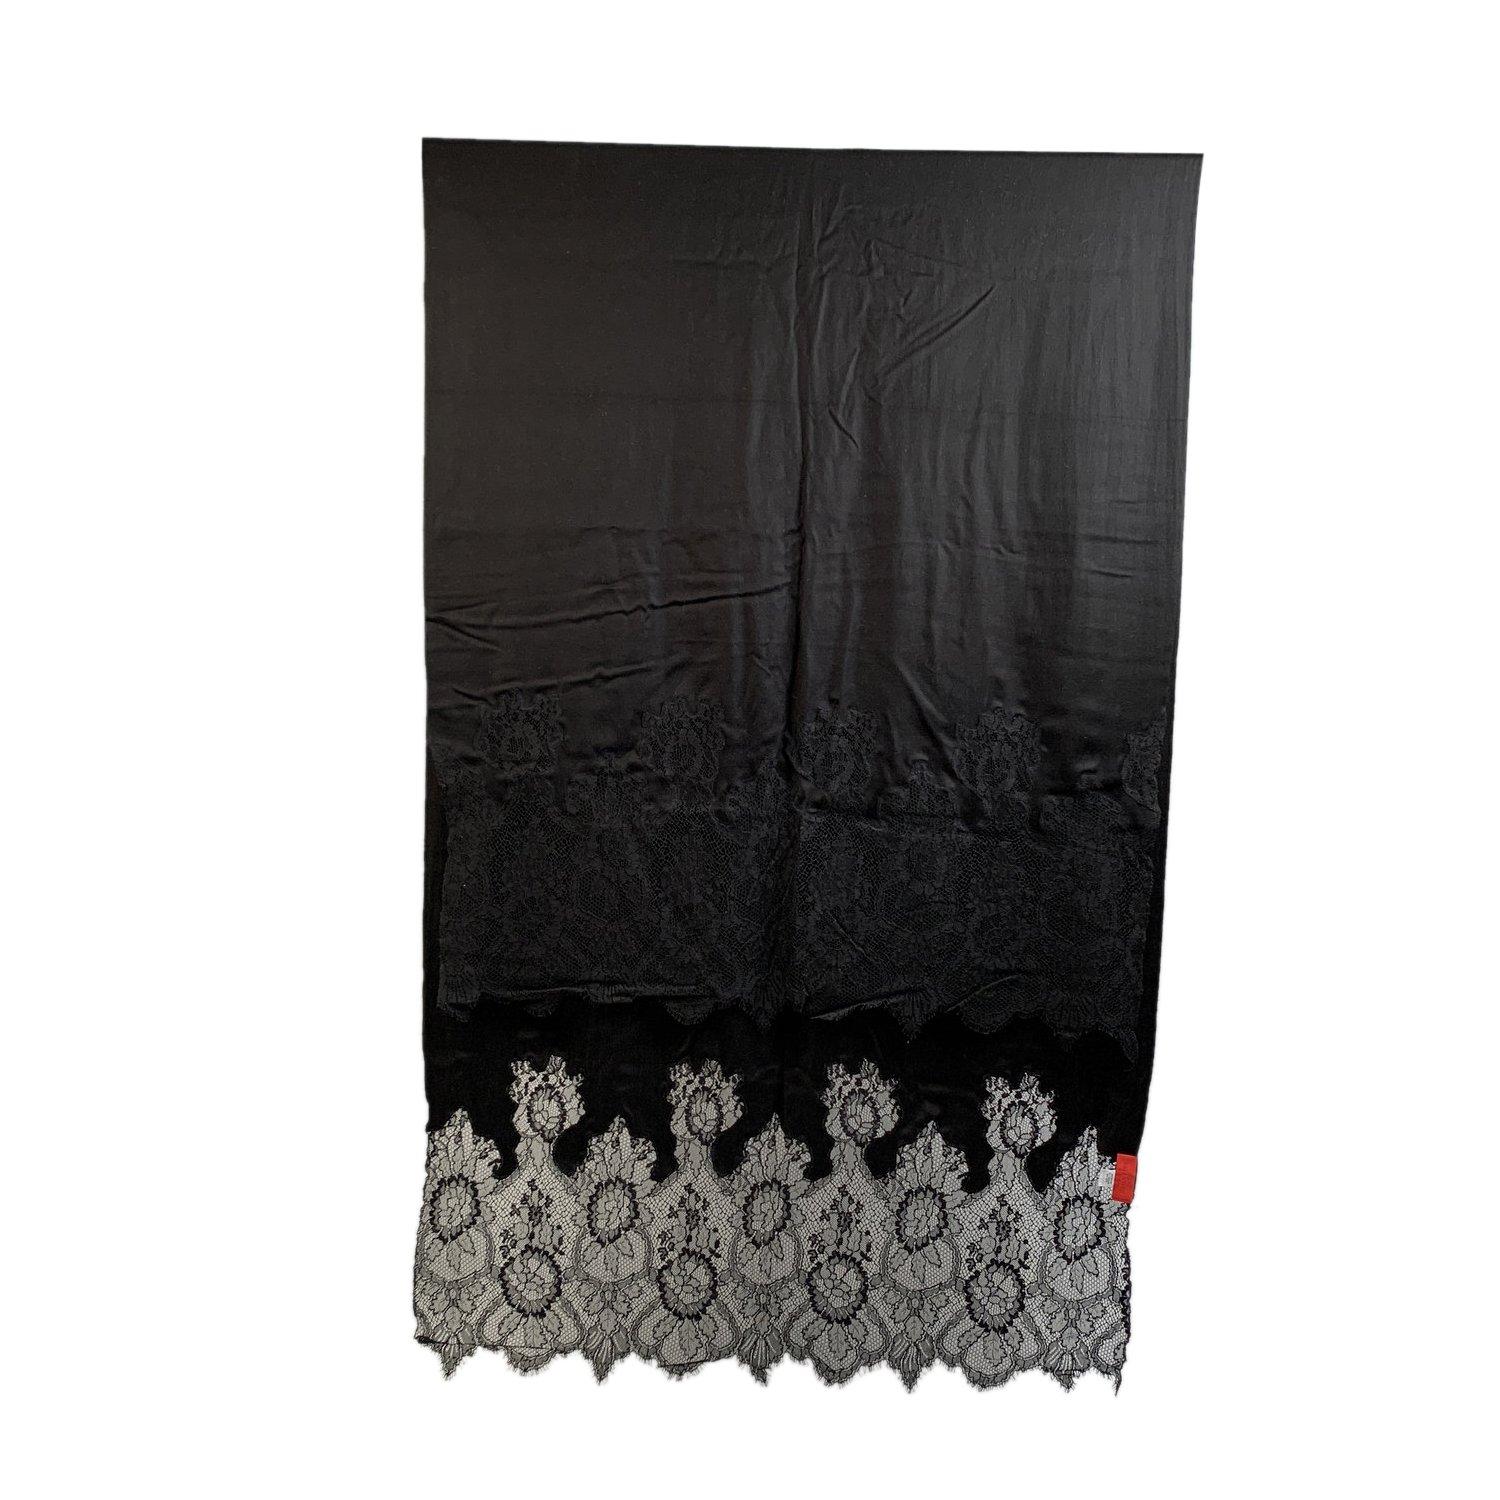 Beautiful and sophisticated Valentino Garavani black maxi shawl with a splendid lace detailing at the ends. Composition: 70% cashmere 30% Silk. Composition tag is still attached. Width: 43 inches - 109 cm - Total lenght: 108 inches - 274 cm